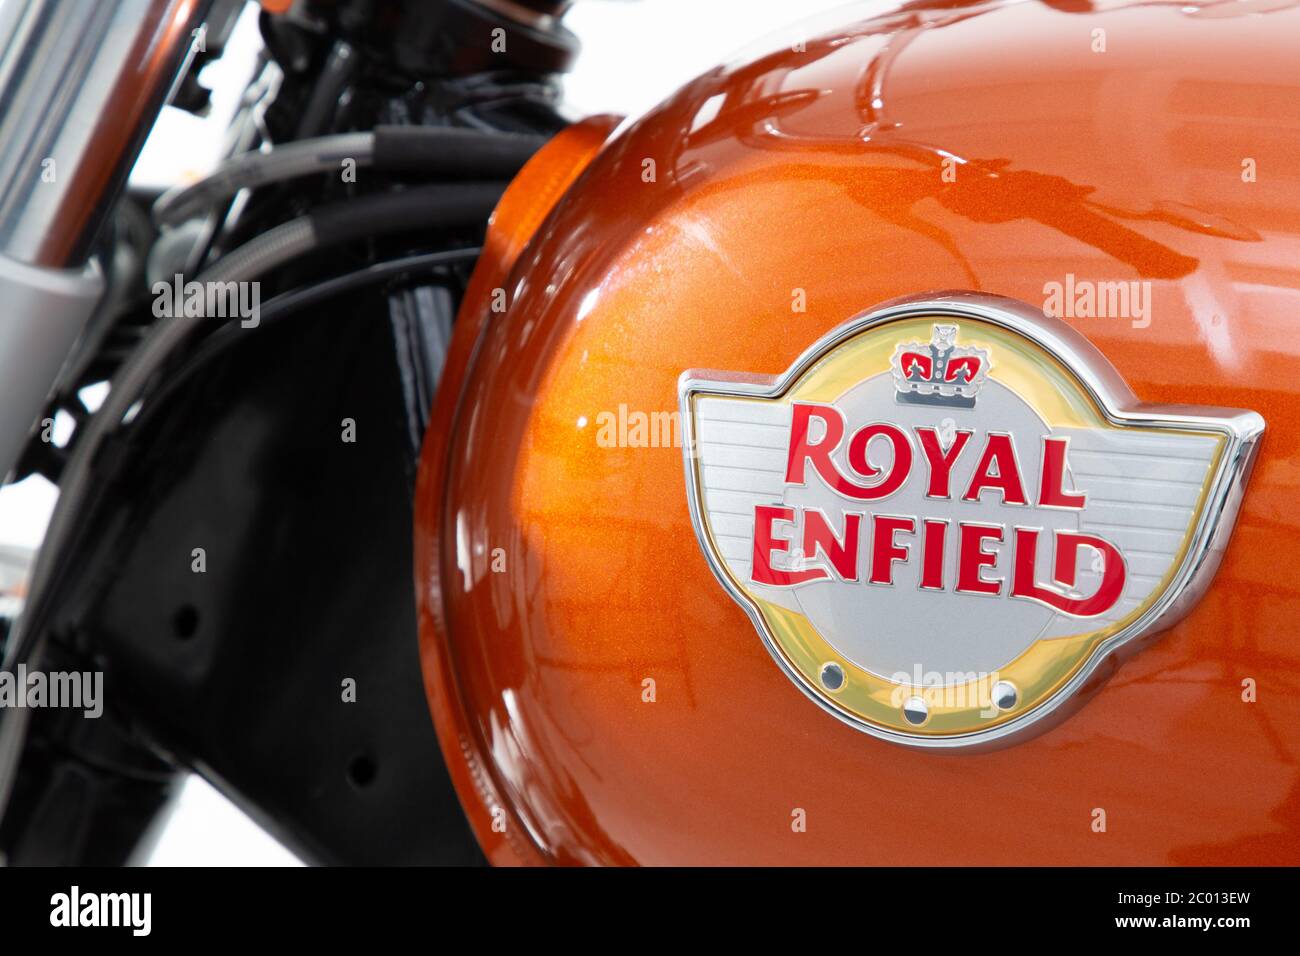 Bordeaux , Aquitaine / France - 06 01 2020 : Royal Enfield logo sign on motorcycle fuel tank orange color of vintage indian motorbike Stock Photo